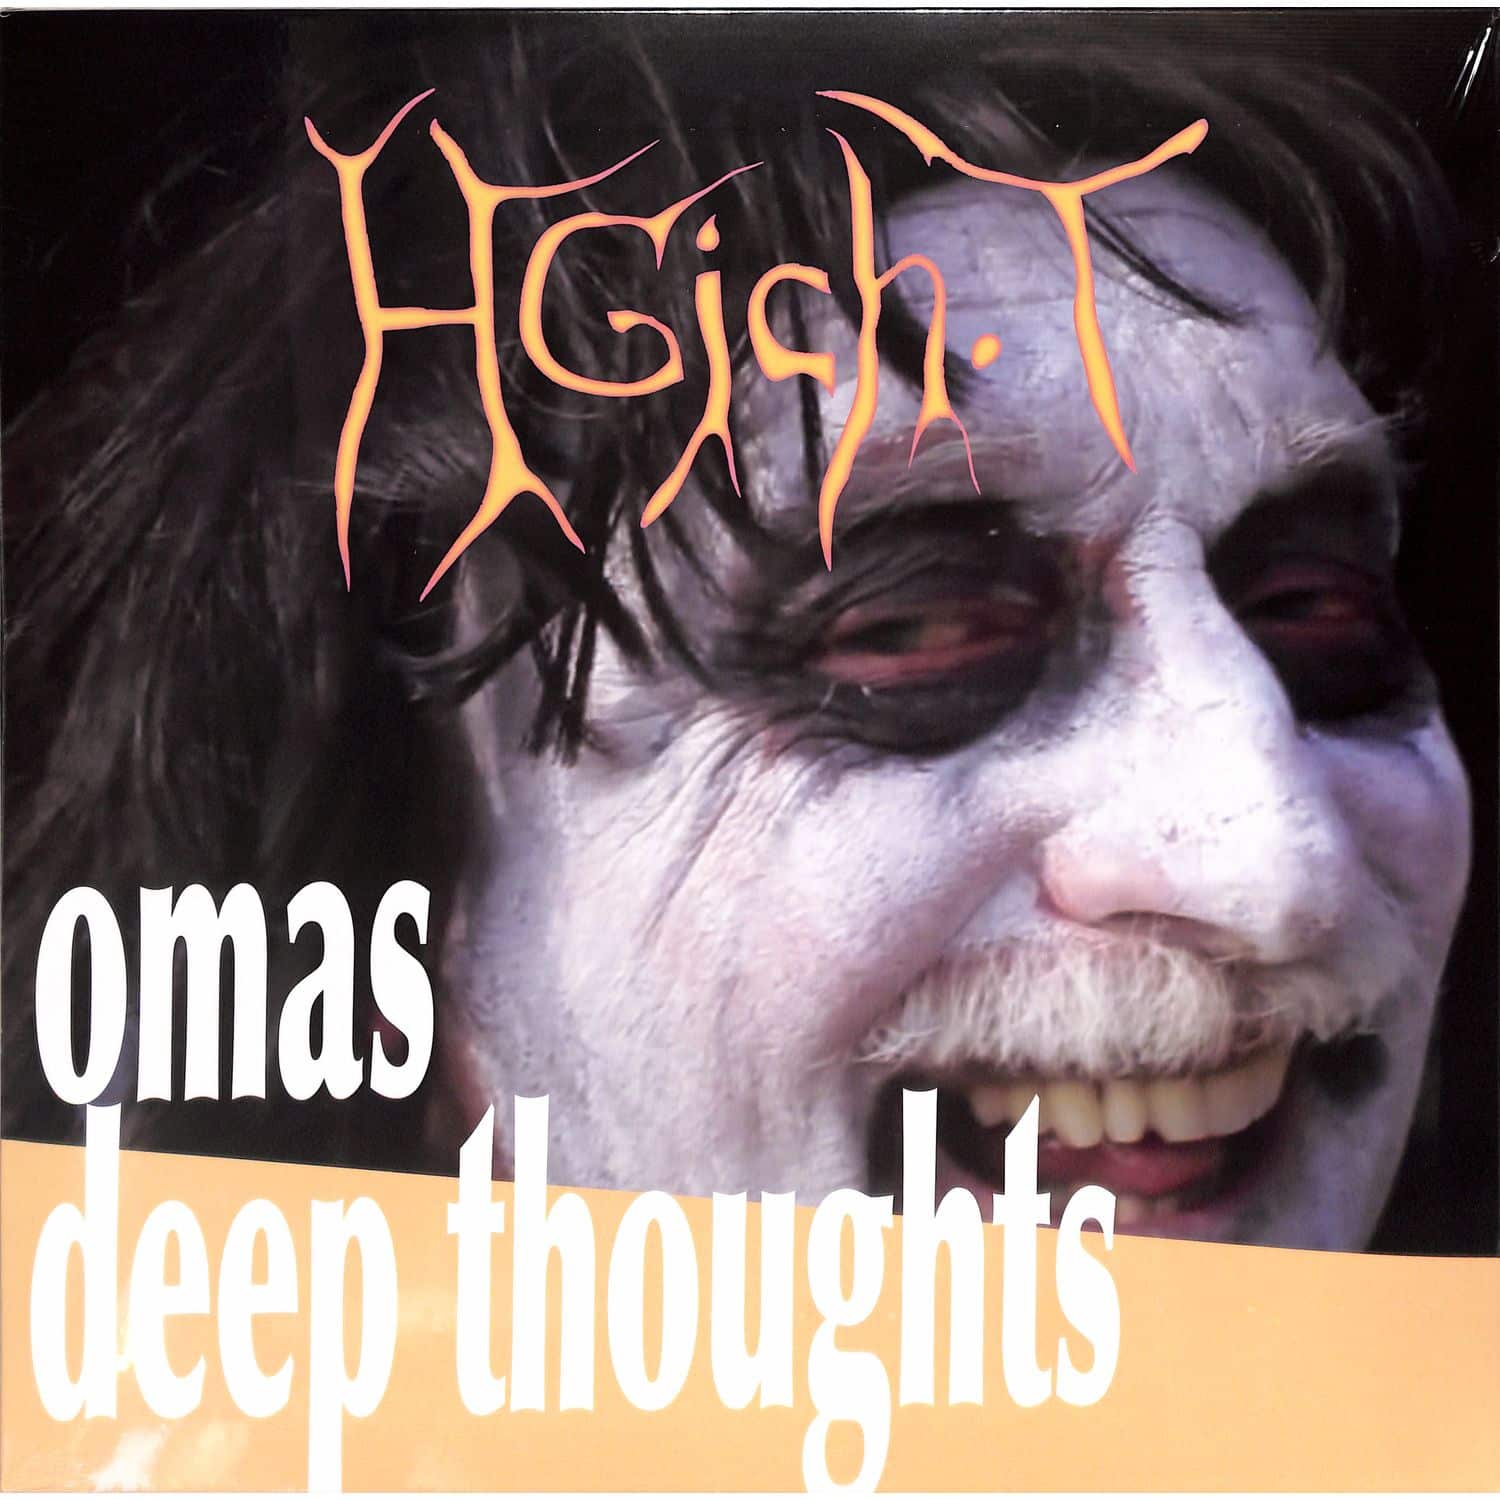 Hgich.T - OMAS DEEP THOUGHTS 